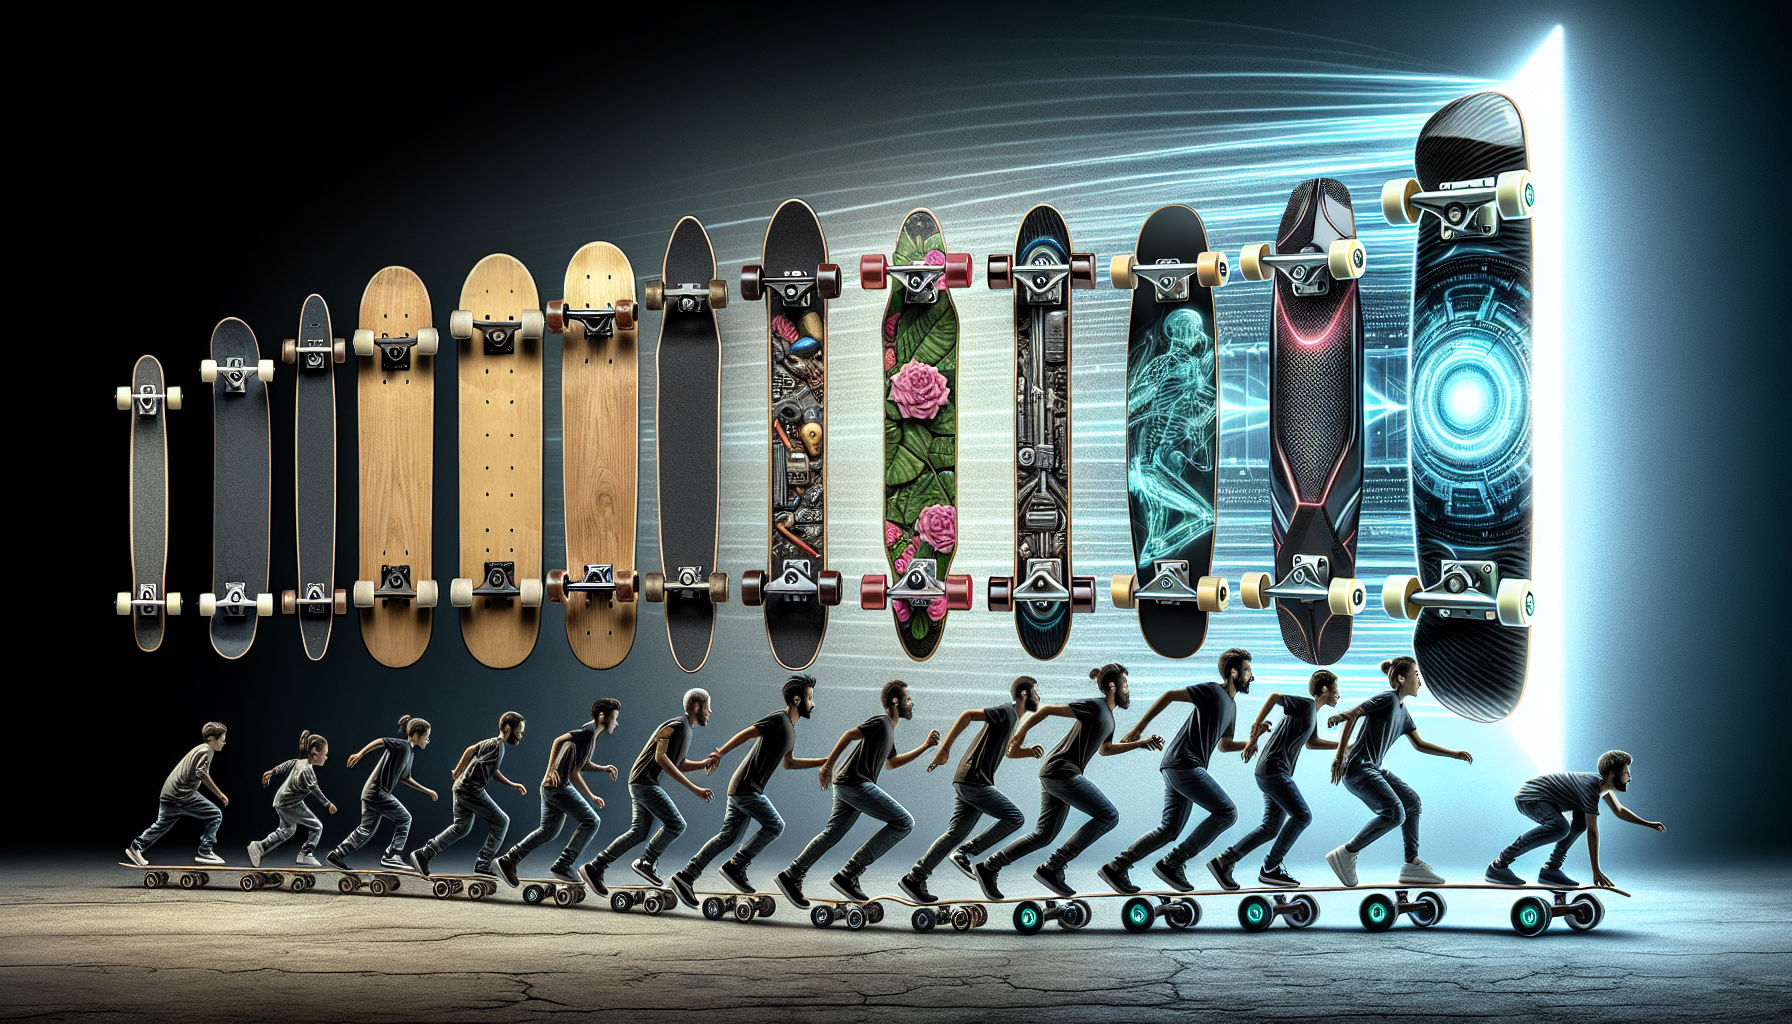 Can You Explain The Impact Of Skateboarding Technology Advancements On The Sport?